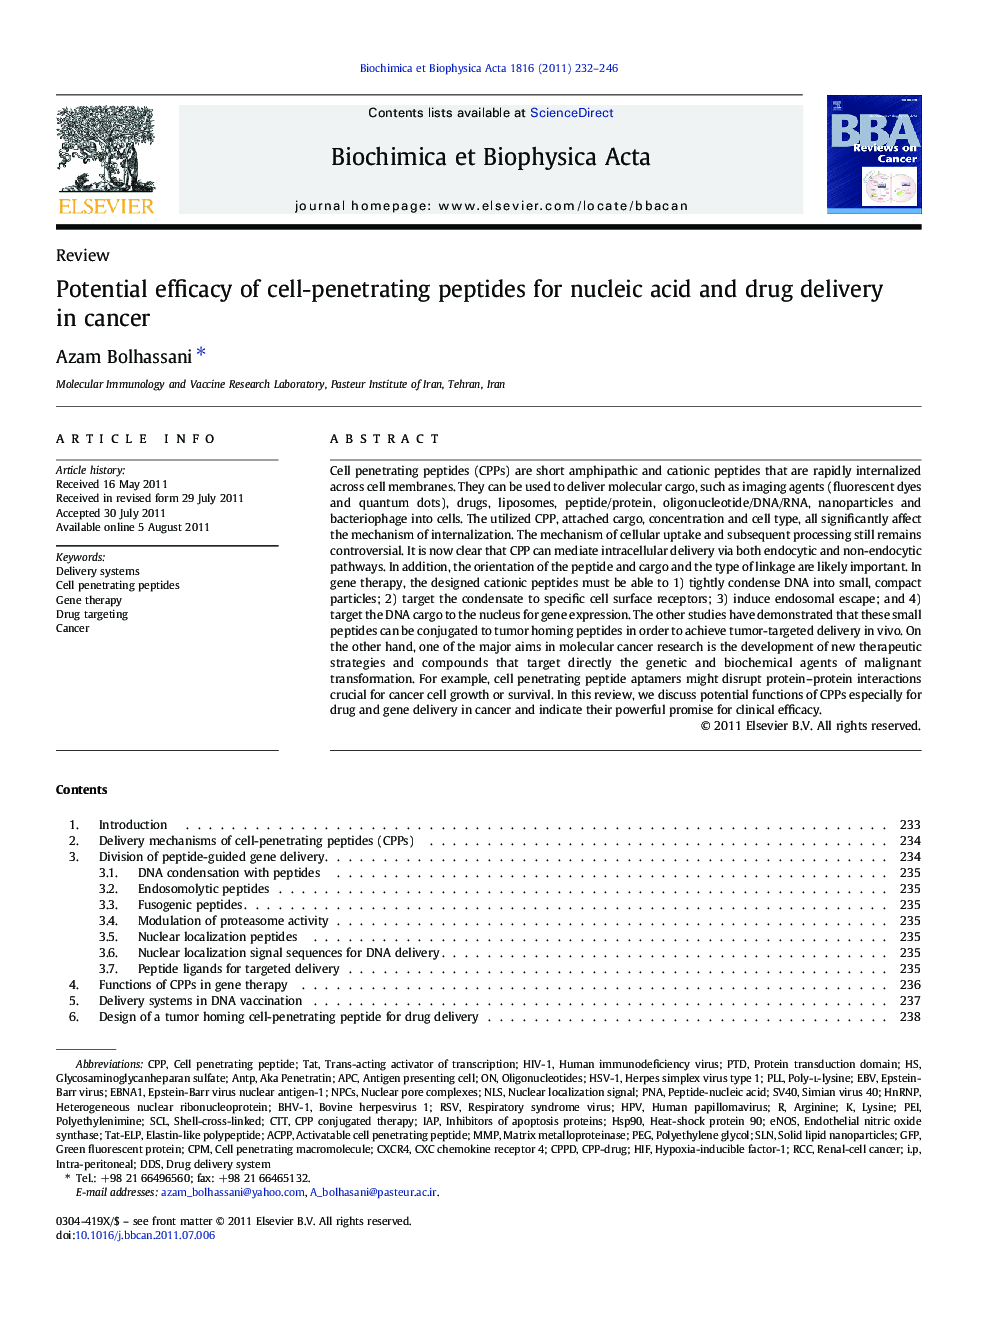 Potential efficacy of cell-penetrating peptides for nucleic acid and drug delivery in cancer